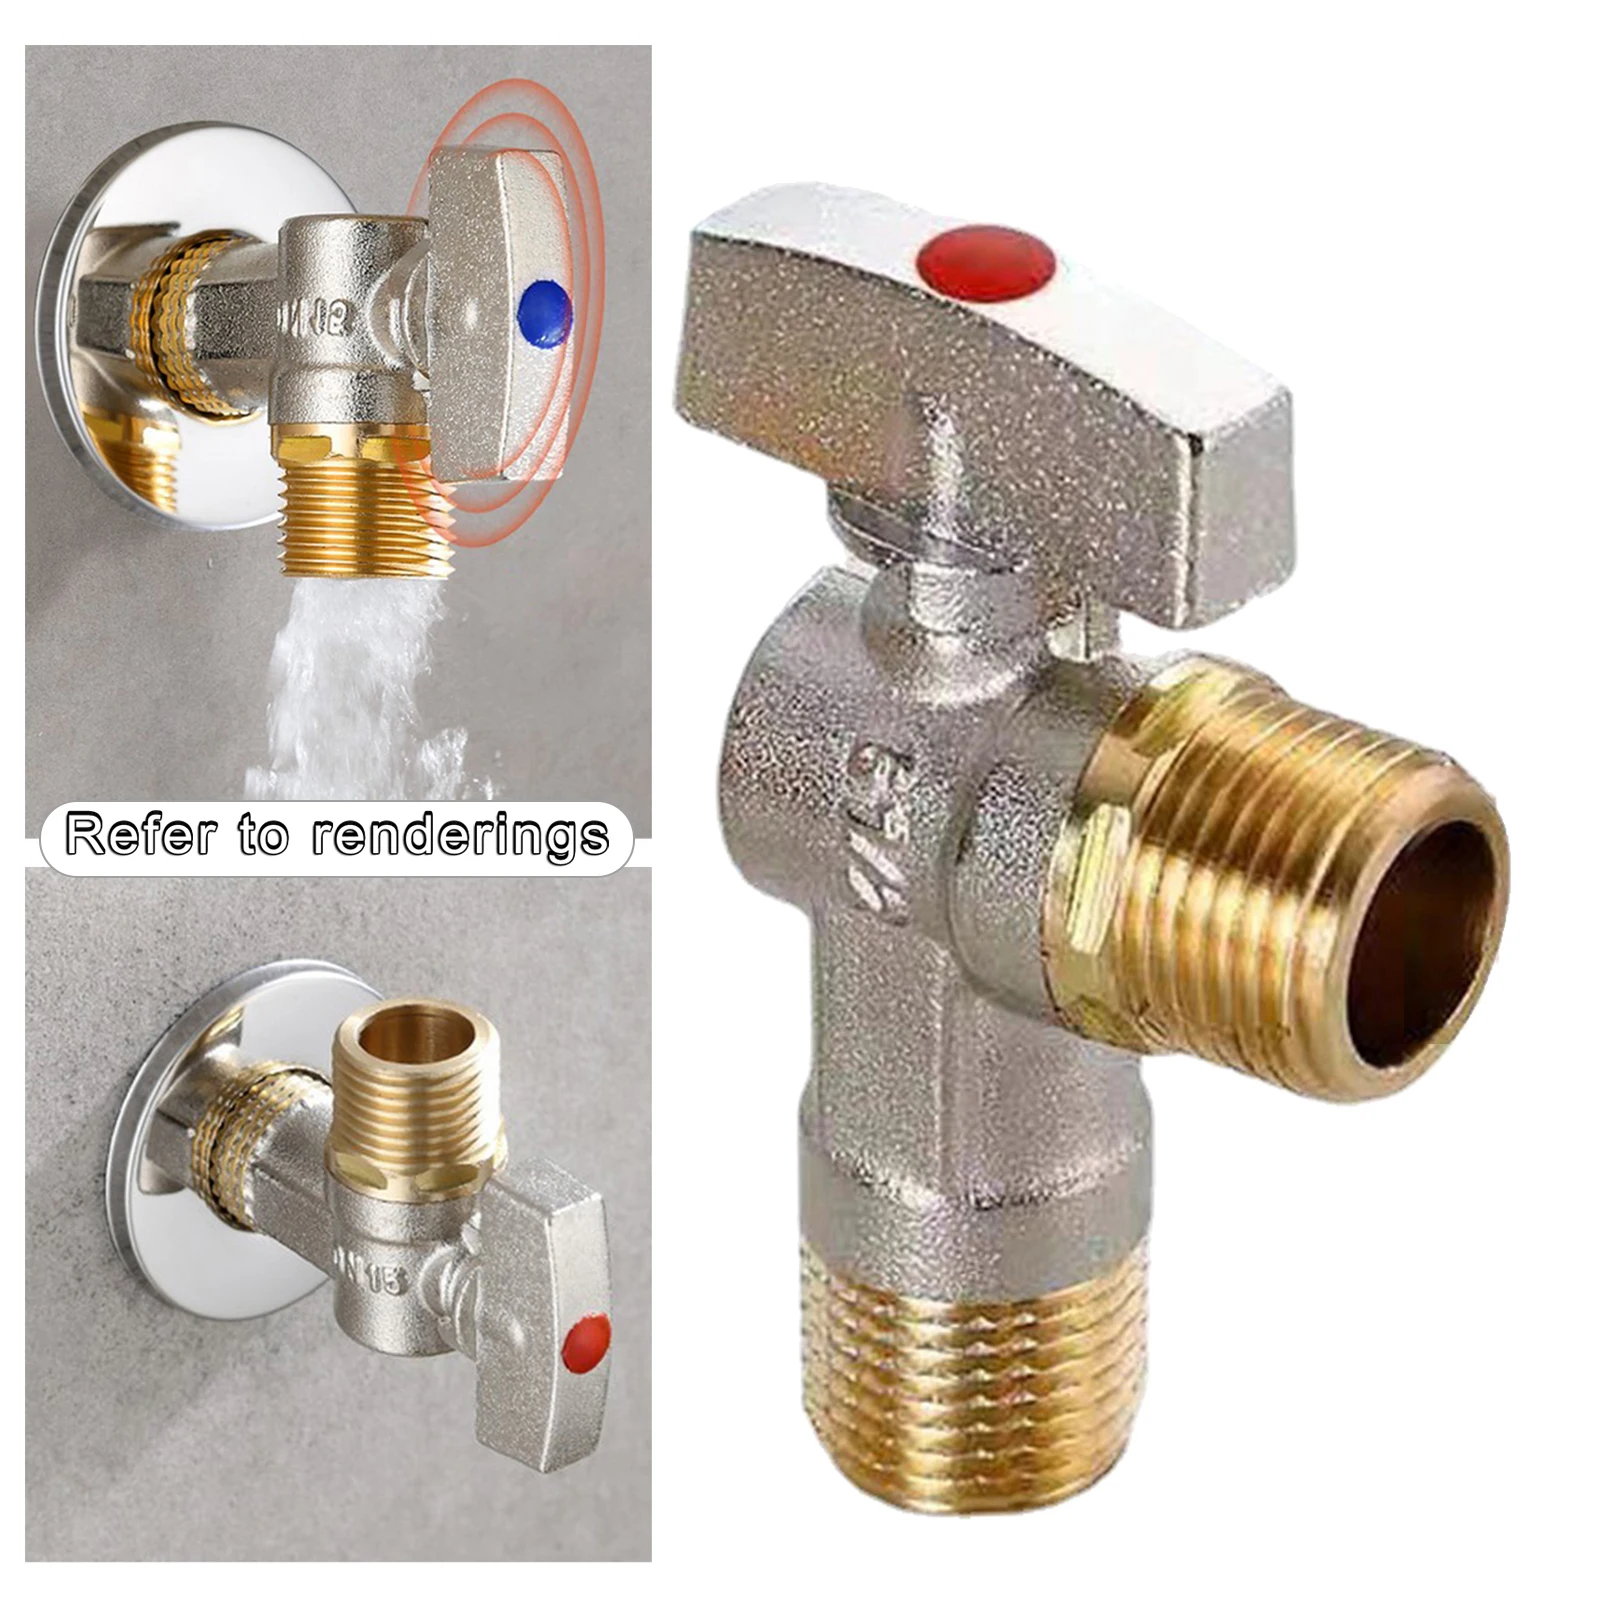 Brass Flow Angle Value Plumbing Fitting Triangle Valve Water Valve Angle Stop Valve for Faucet Bathroom Toilet Sink